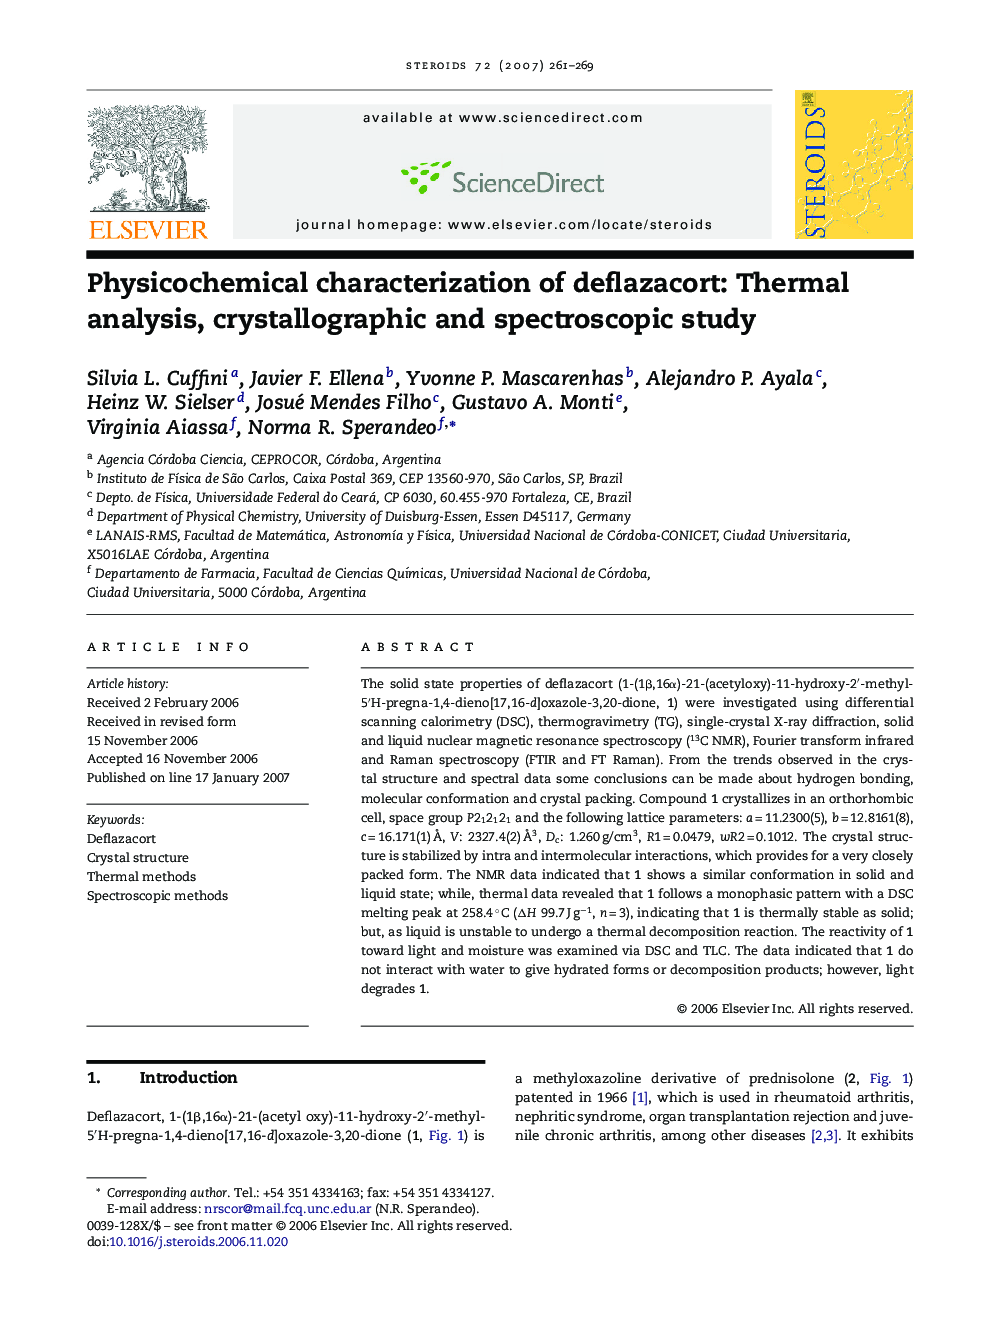 Physicochemical characterization of deflazacort: Thermal analysis, crystallographic and spectroscopic study